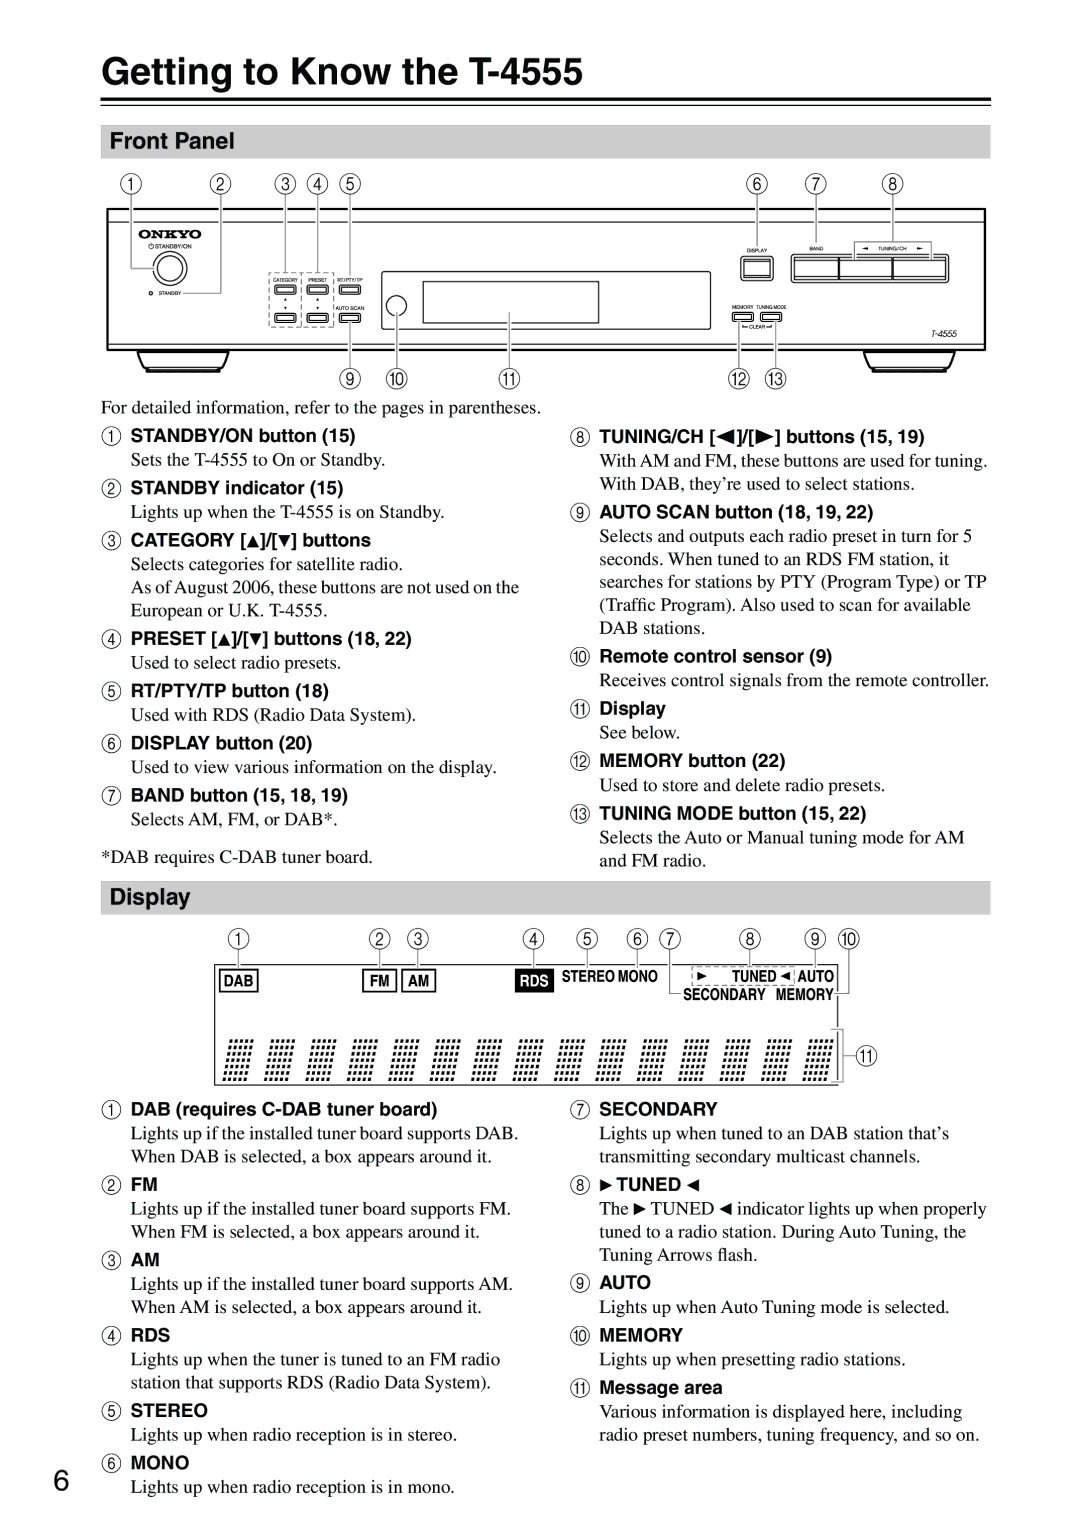 Onkyo instruction manual Getting to Know the T-4555, Front Panel, Display 